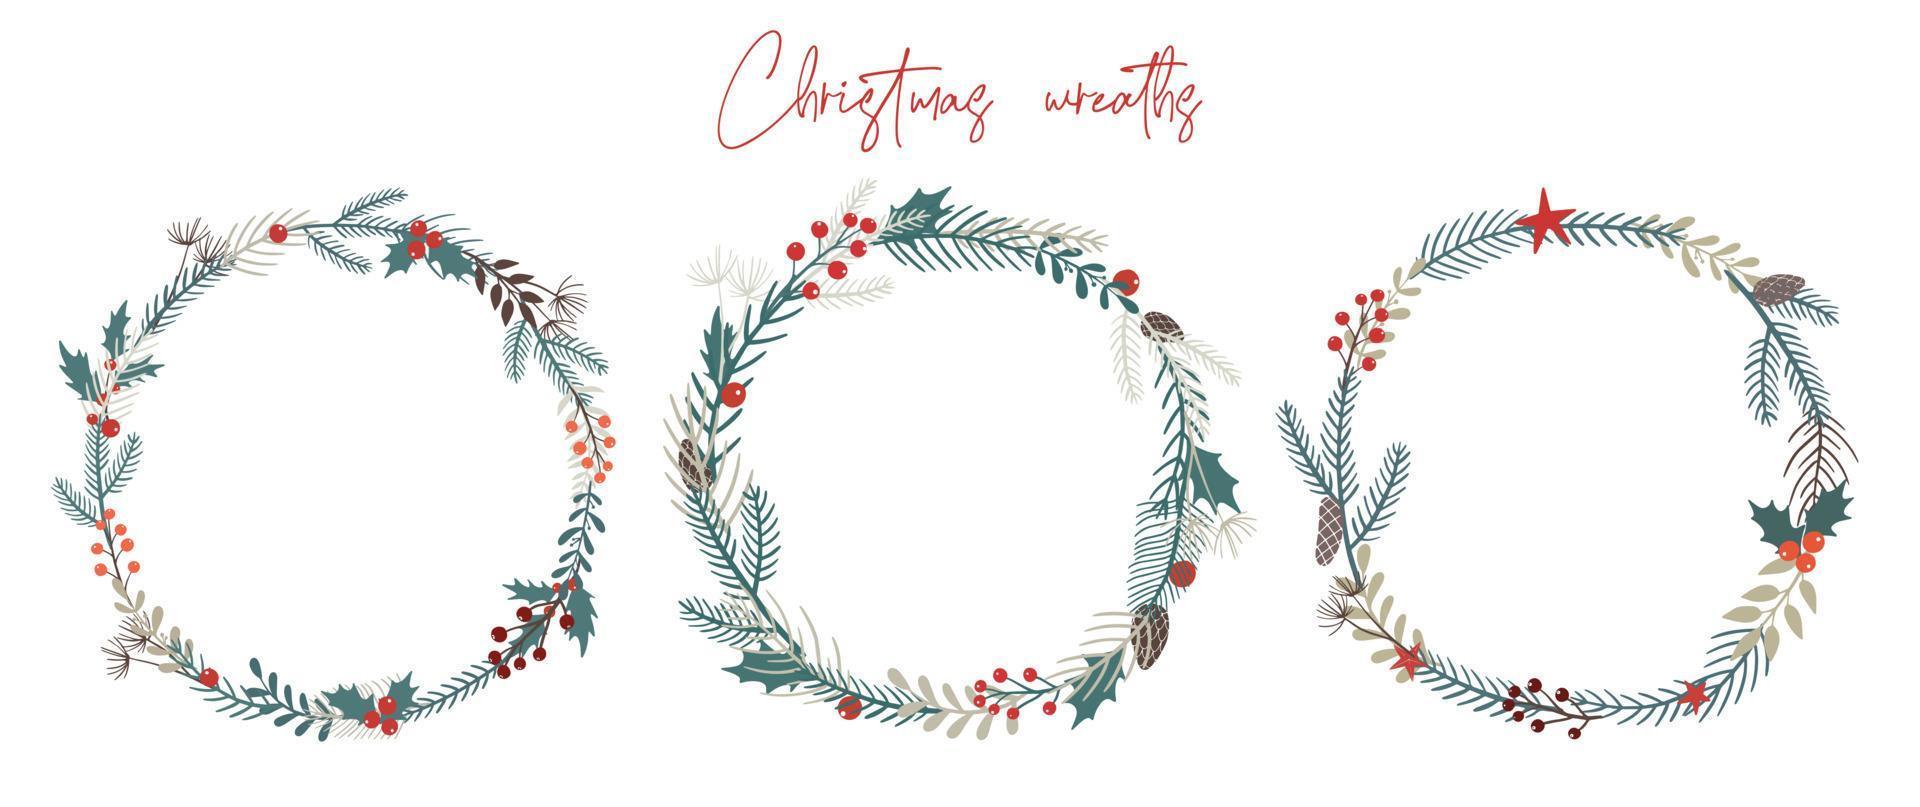 Set of three Christmas wreaths decorated with branches, leaves, holly, berries, etc. Good for cards, posters, prints, invitations, templates design. EPS 10 vector